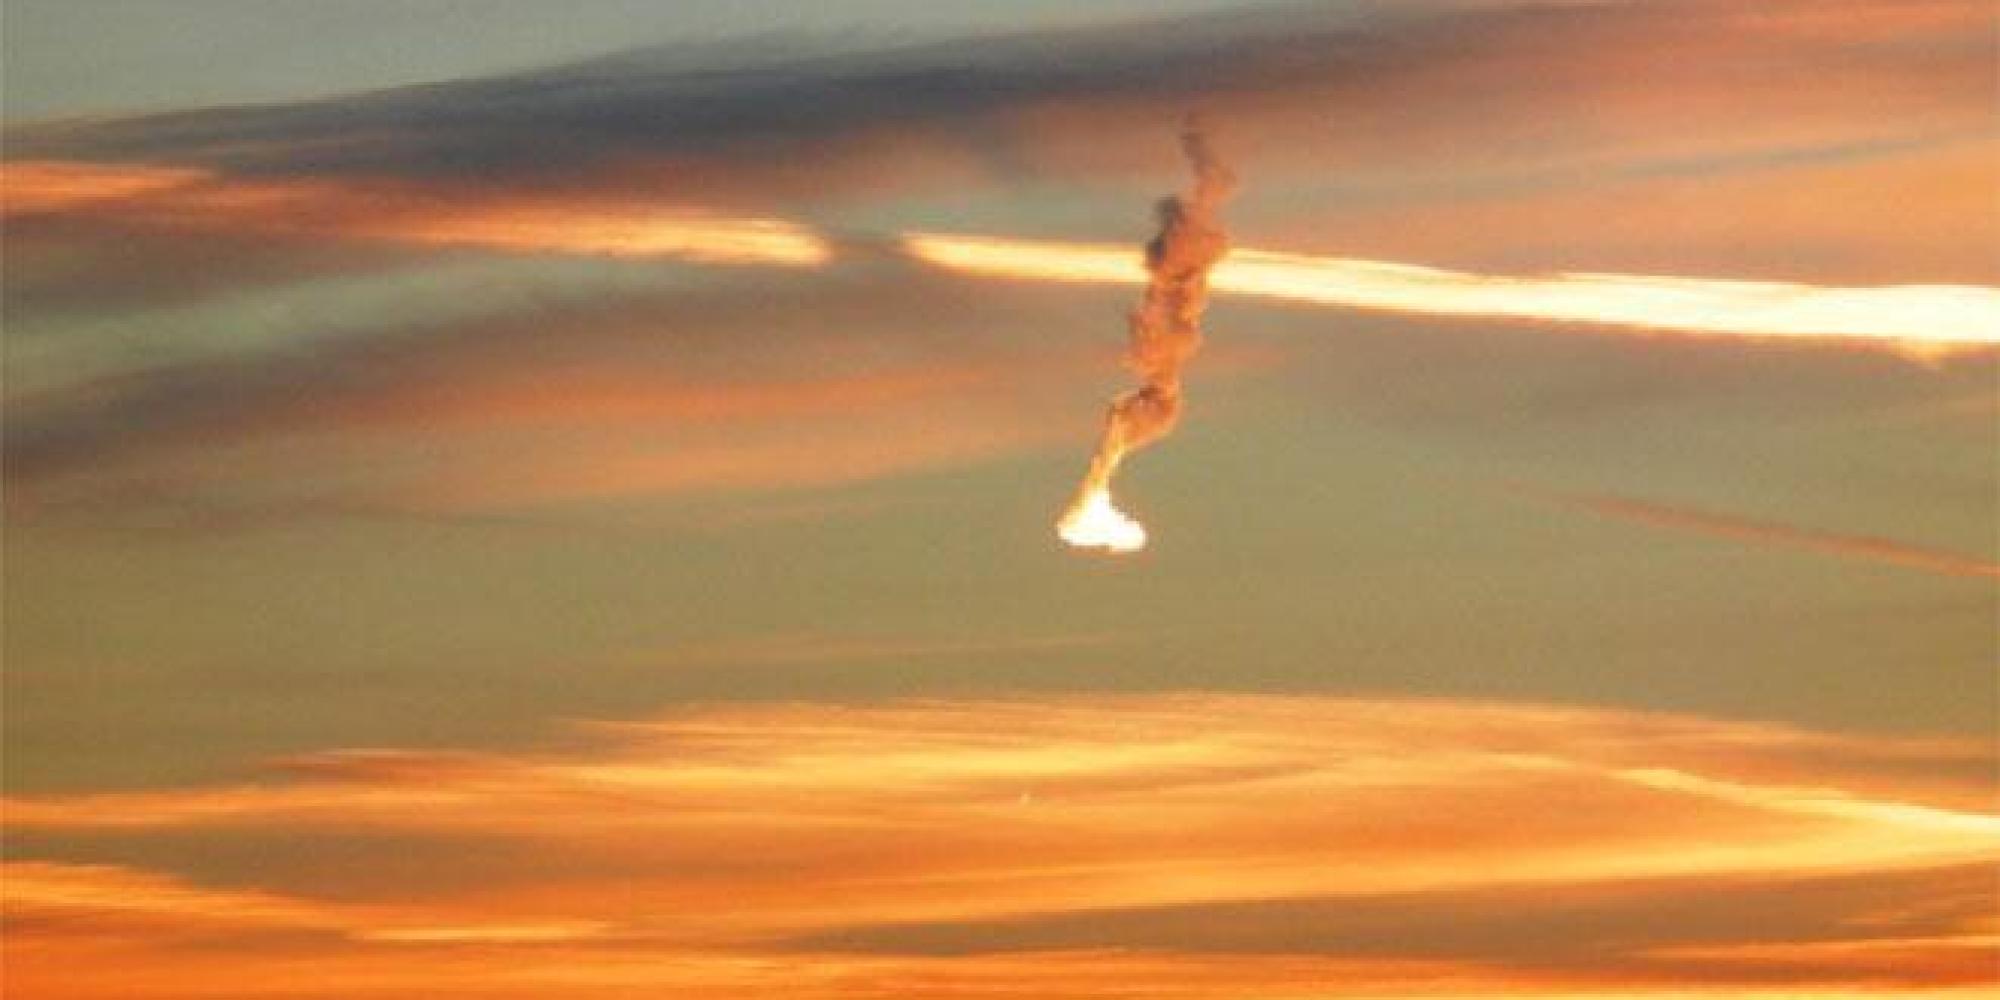 What Was That Mysterious 'Fireball' That Streaked Across The Oregon Sky